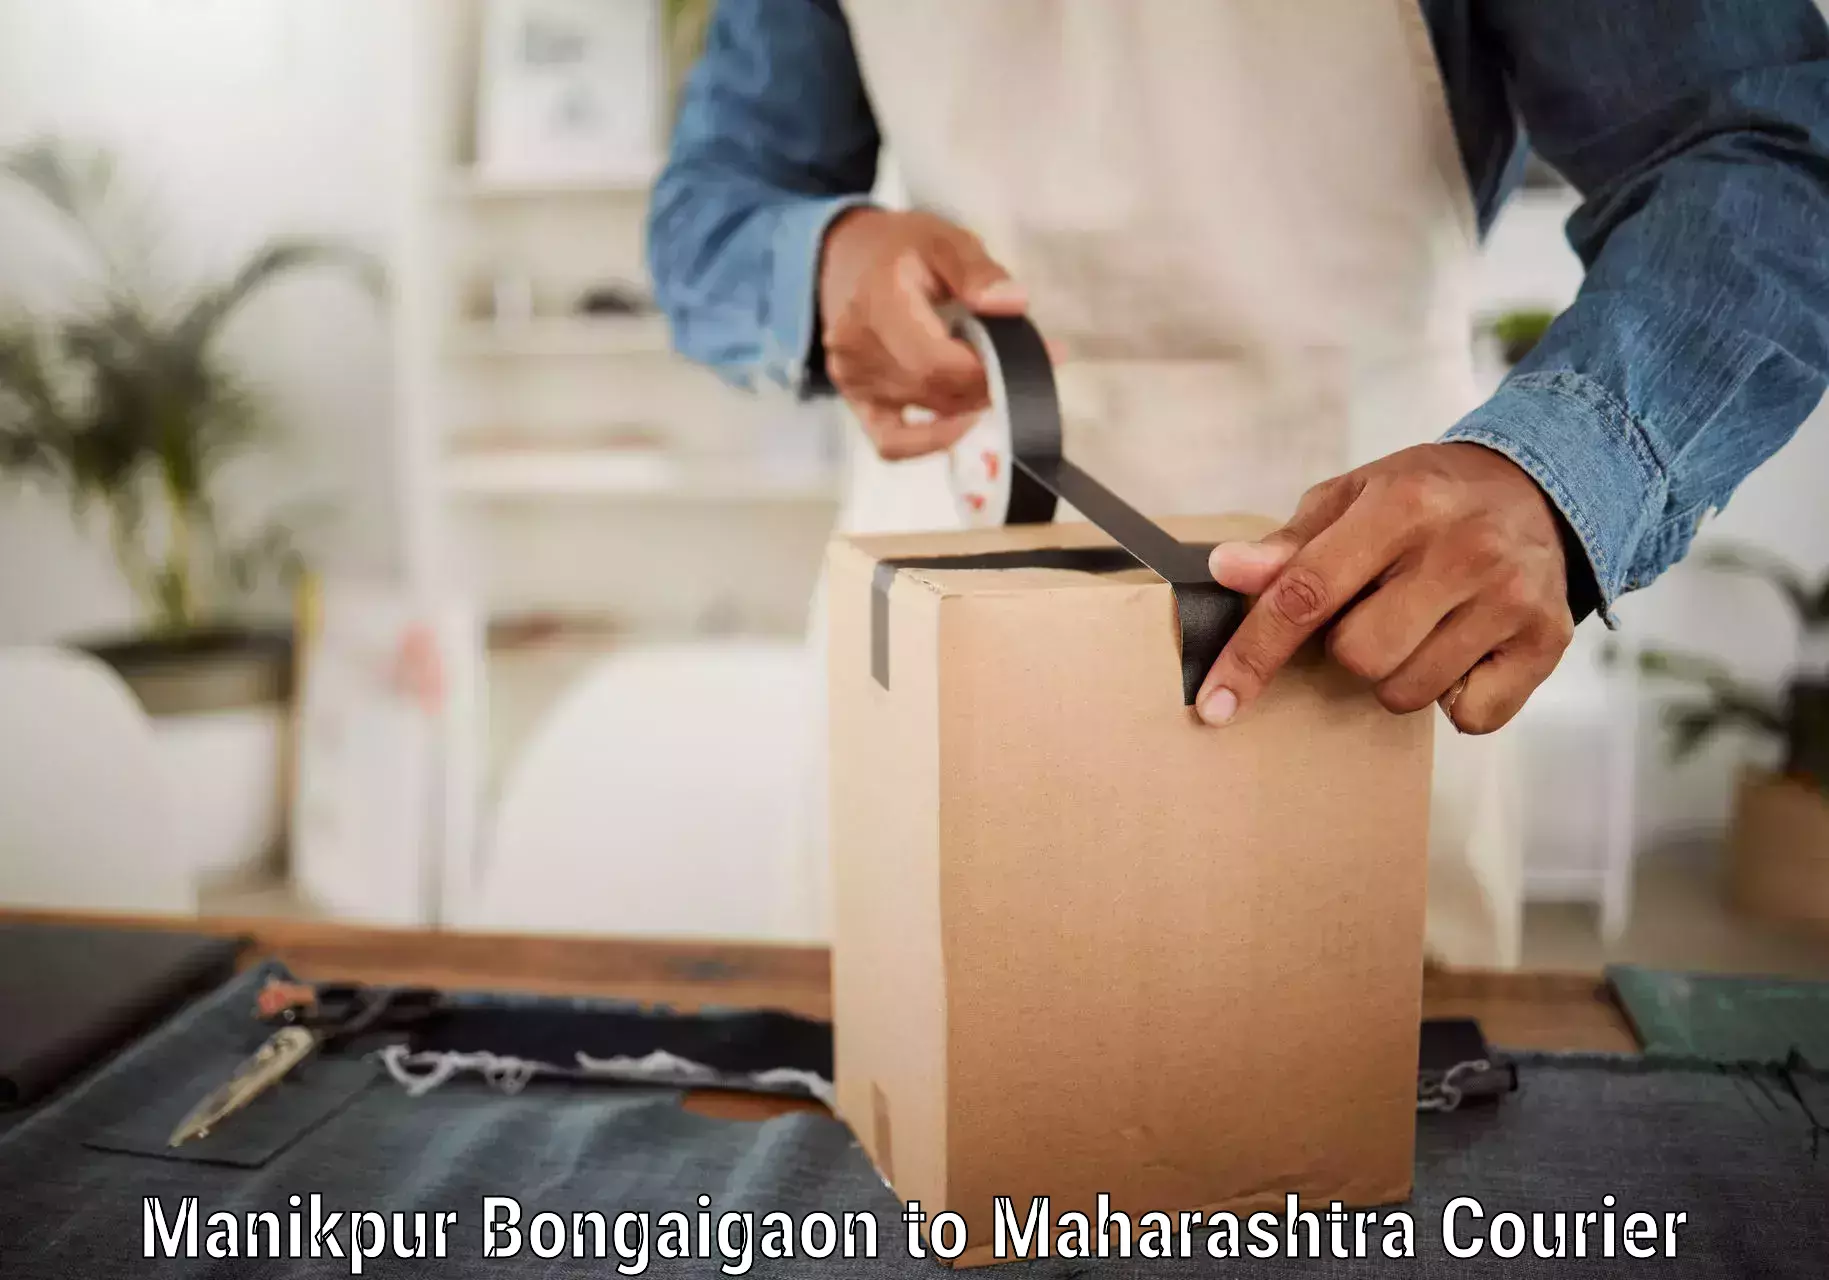 Quality courier services Manikpur Bongaigaon to Dharmabad